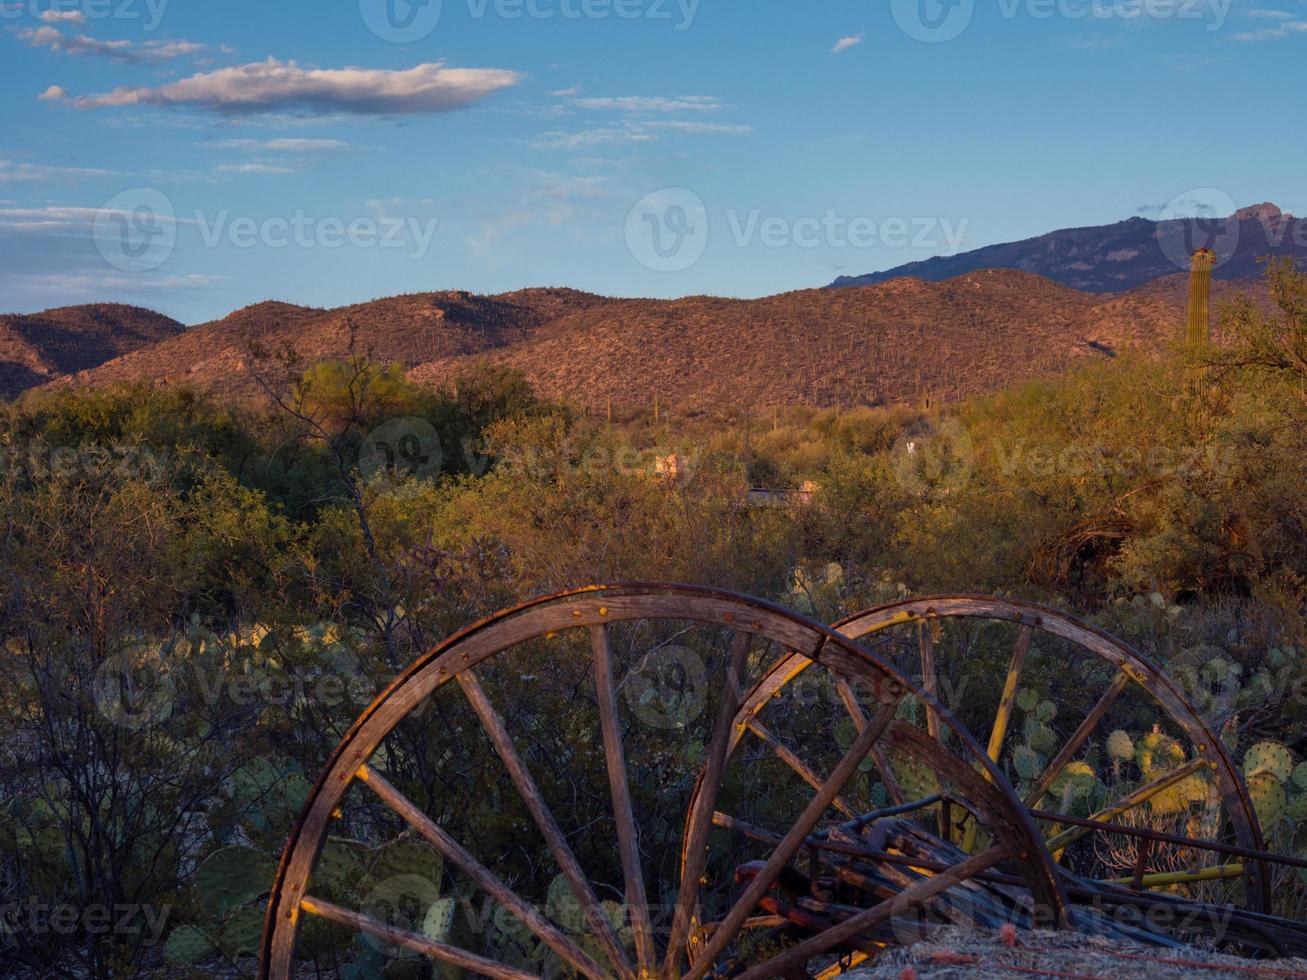 Rusted carriage weels in Arizona desert at sunset photo